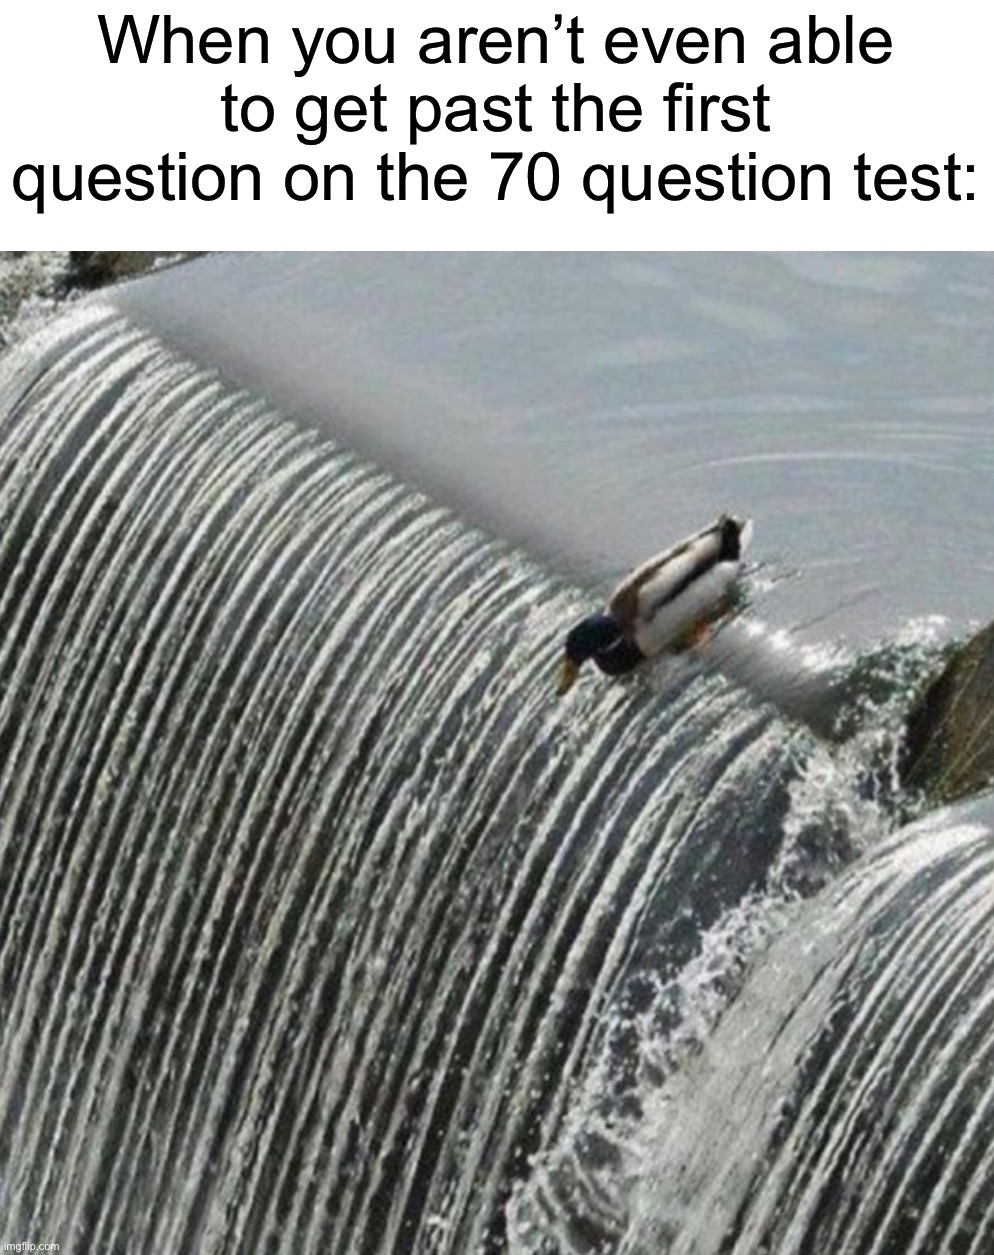 Guess I’ll die | When you aren’t even able to get past the first question on the 70 question test: | image tagged in memes,funny,true story,relatable memes,school,oh no | made w/ Imgflip meme maker